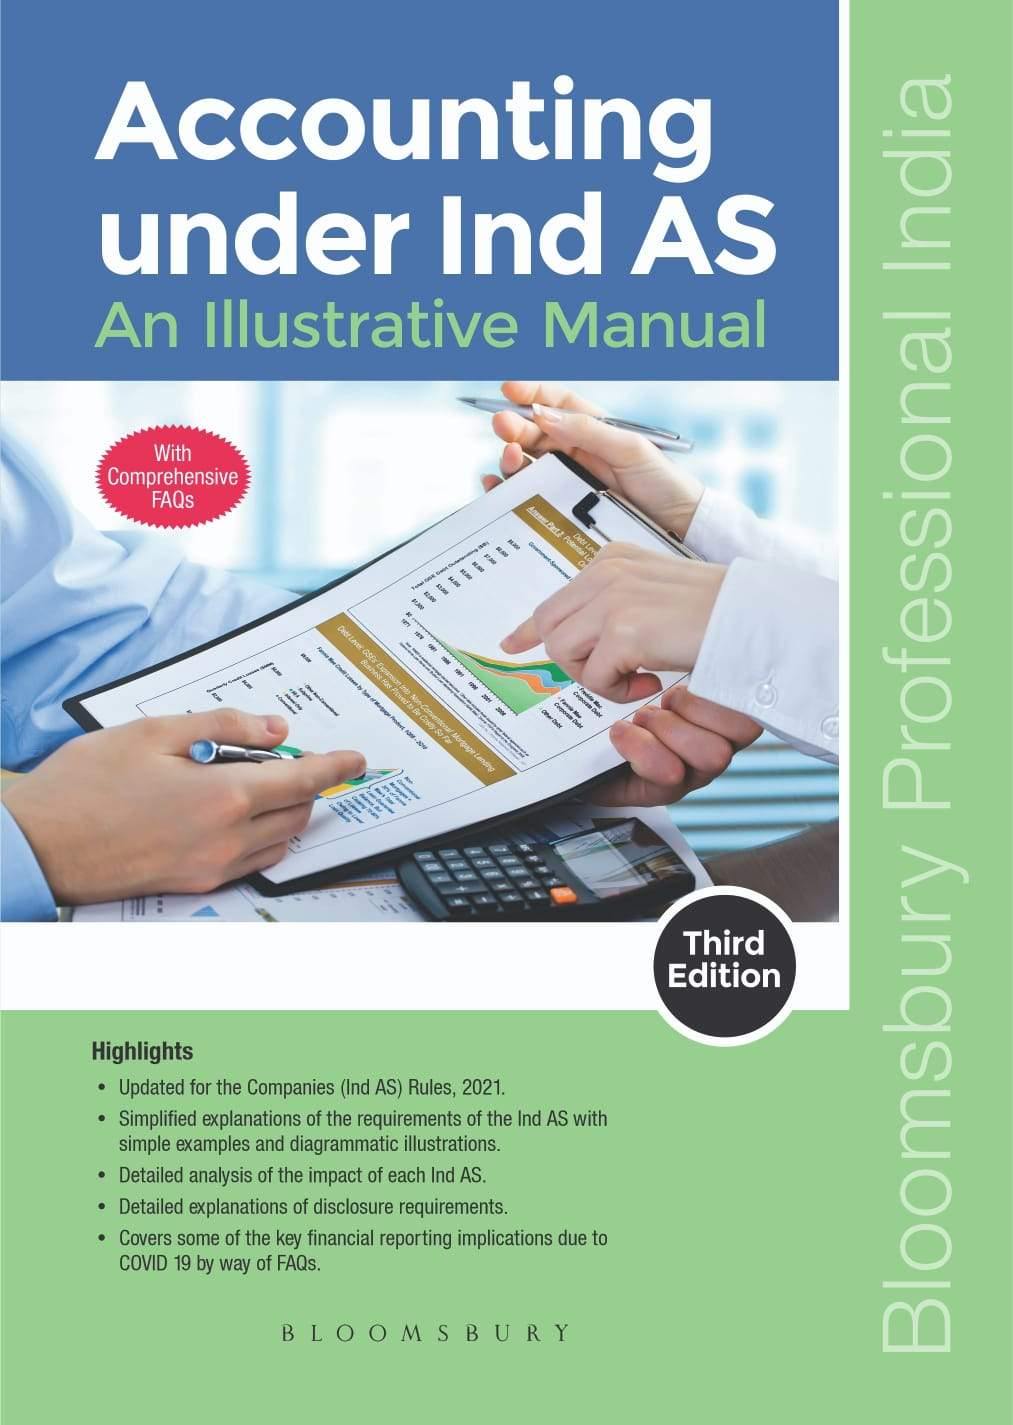 Accounting under Ind AS: An Illustrative Manual